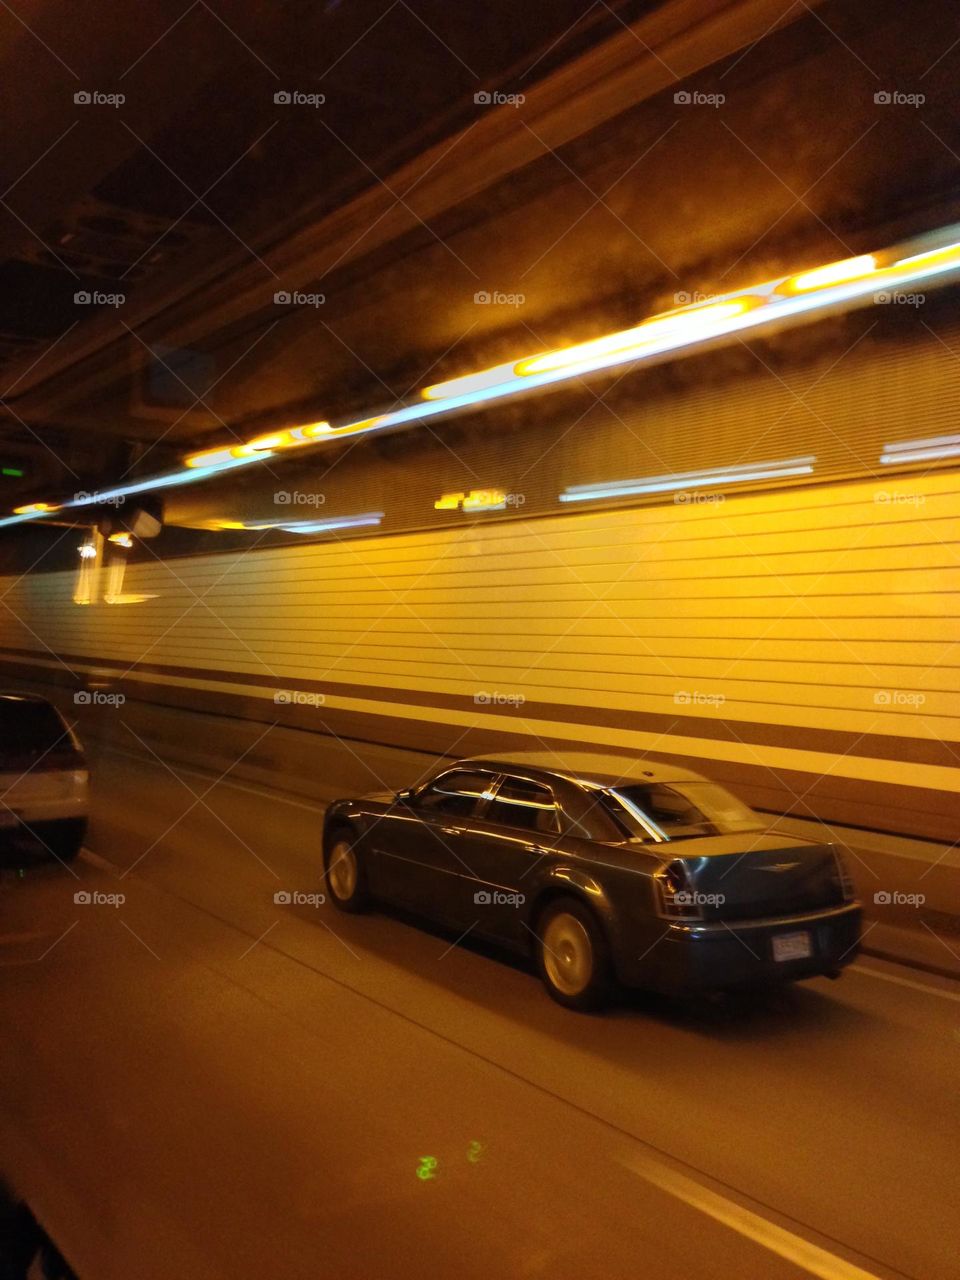 I was on a bus driving through the Callahan Tunnel in Boston, filming the passing cars speeding by.